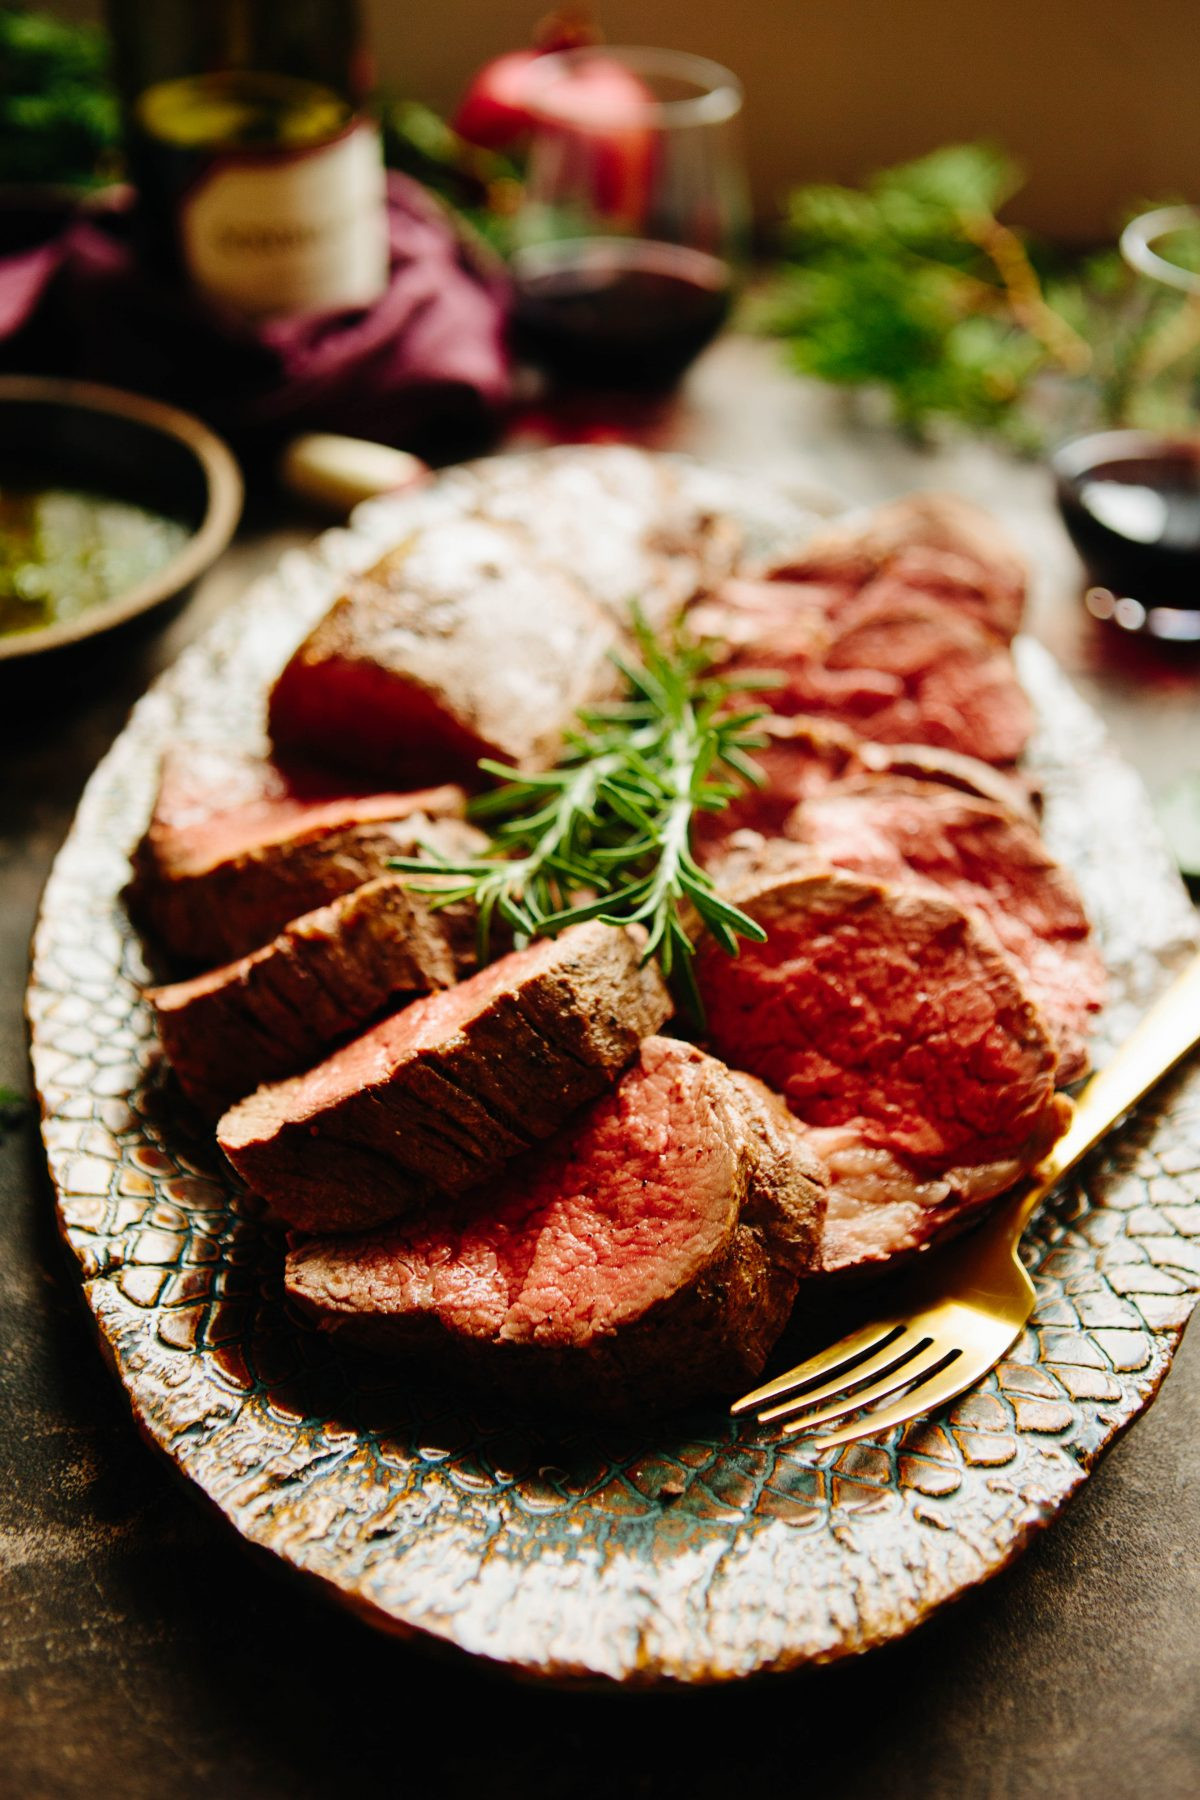 How To Cook A Beef Tenderloin
 How to Make Roasted Beef Tenderloin and Pair It with Wine